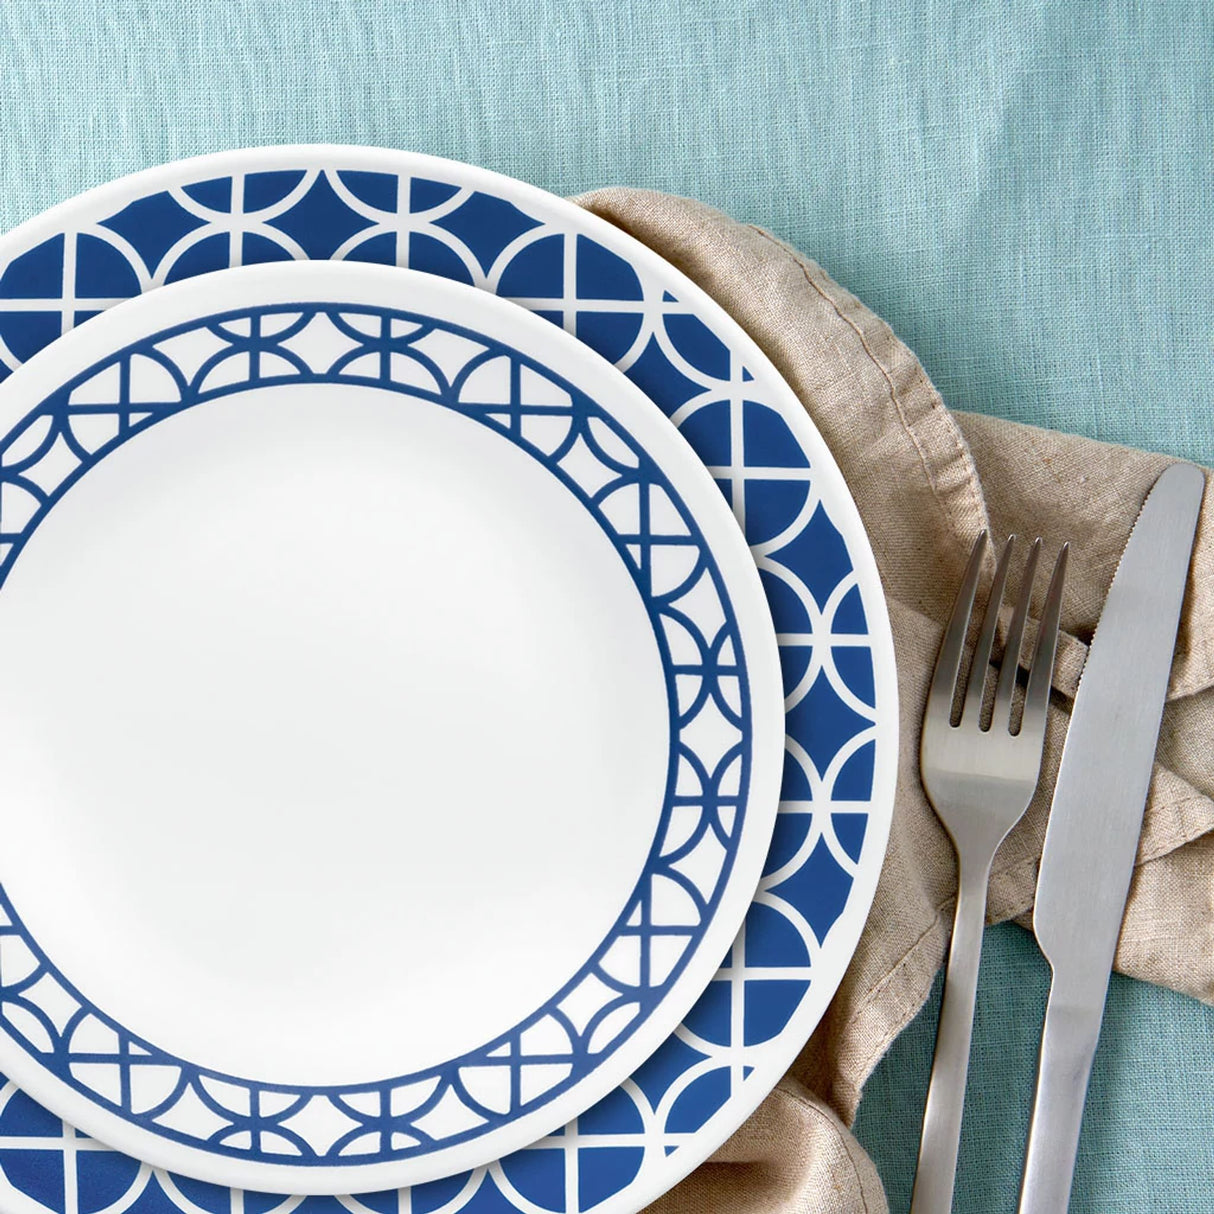  Cobalt circles dinner &amp; appetizer plates with text that says eco-friendly made from up to 80% recycled glass